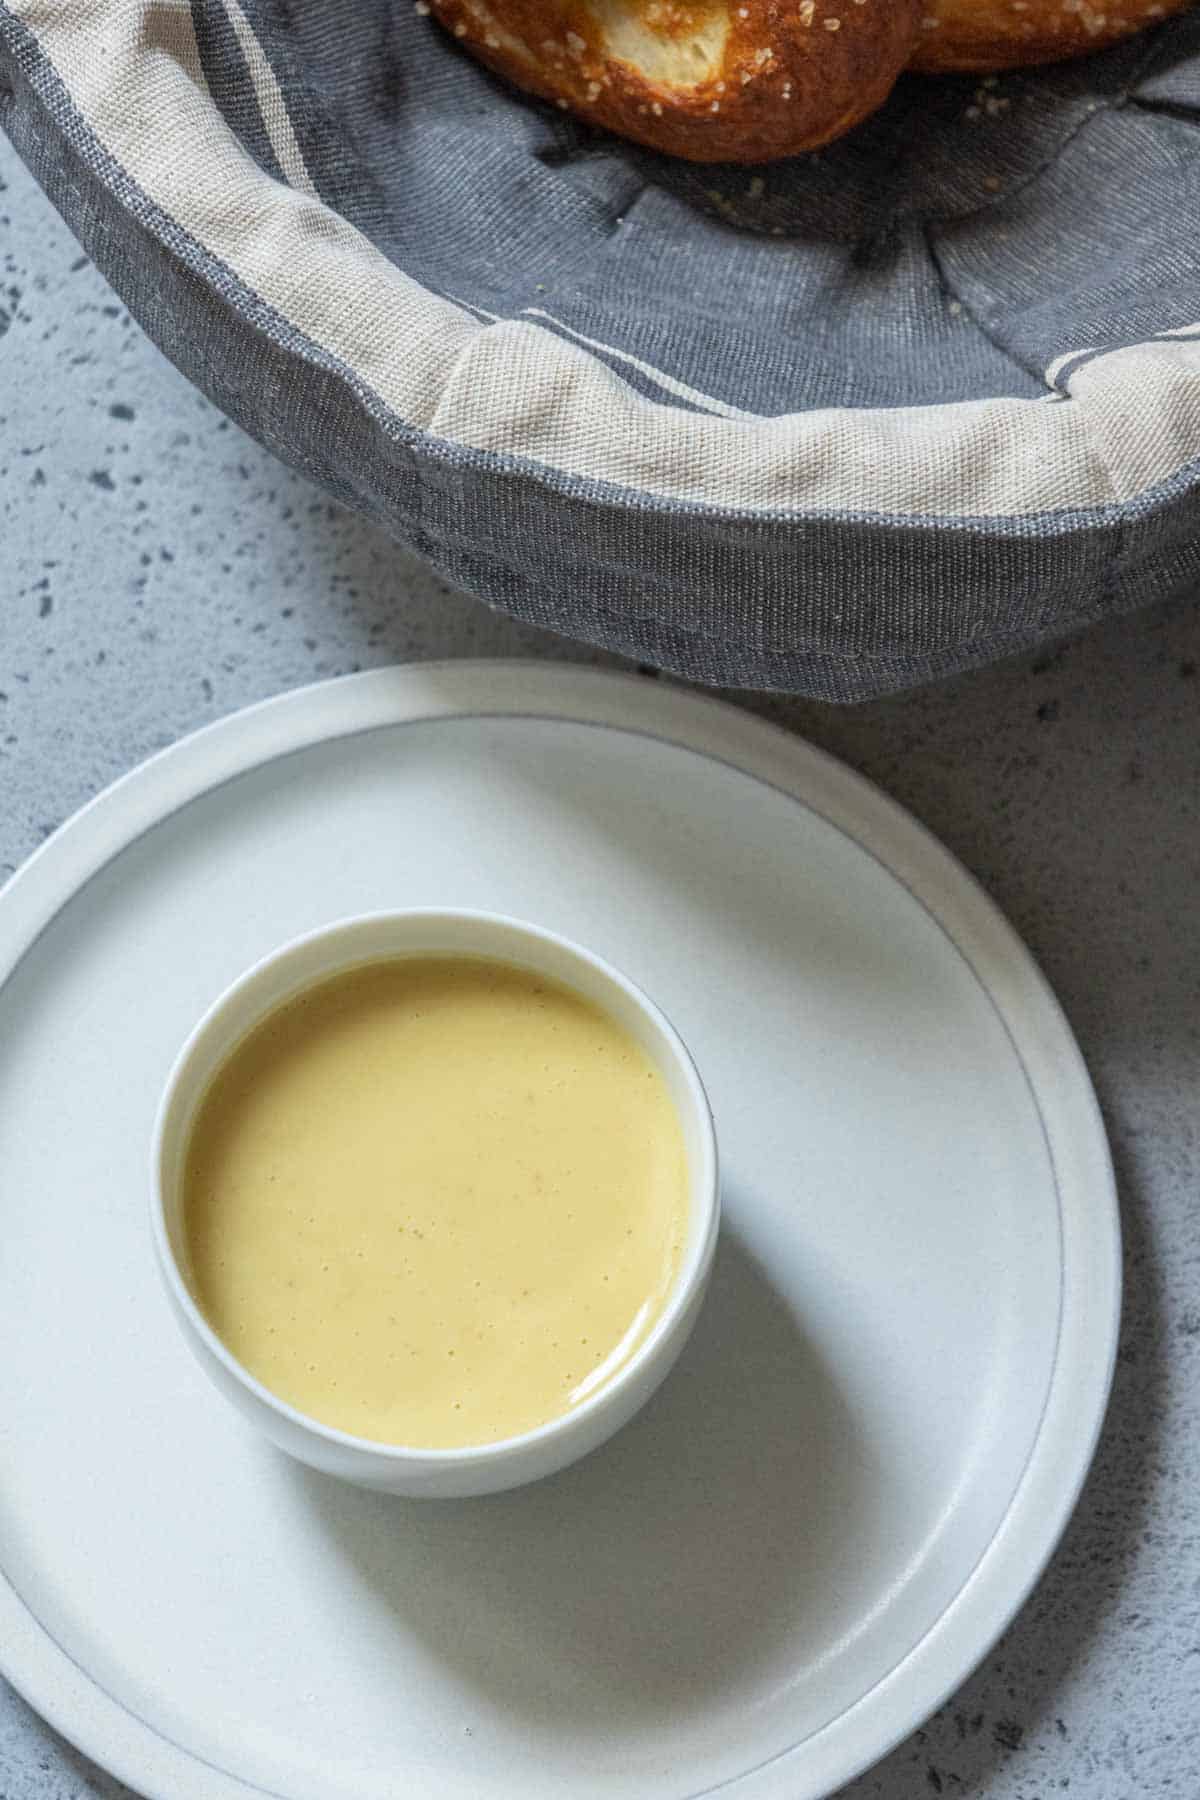 Overhead of small white bowl containing honey mustard sauce on top of a gray plate.